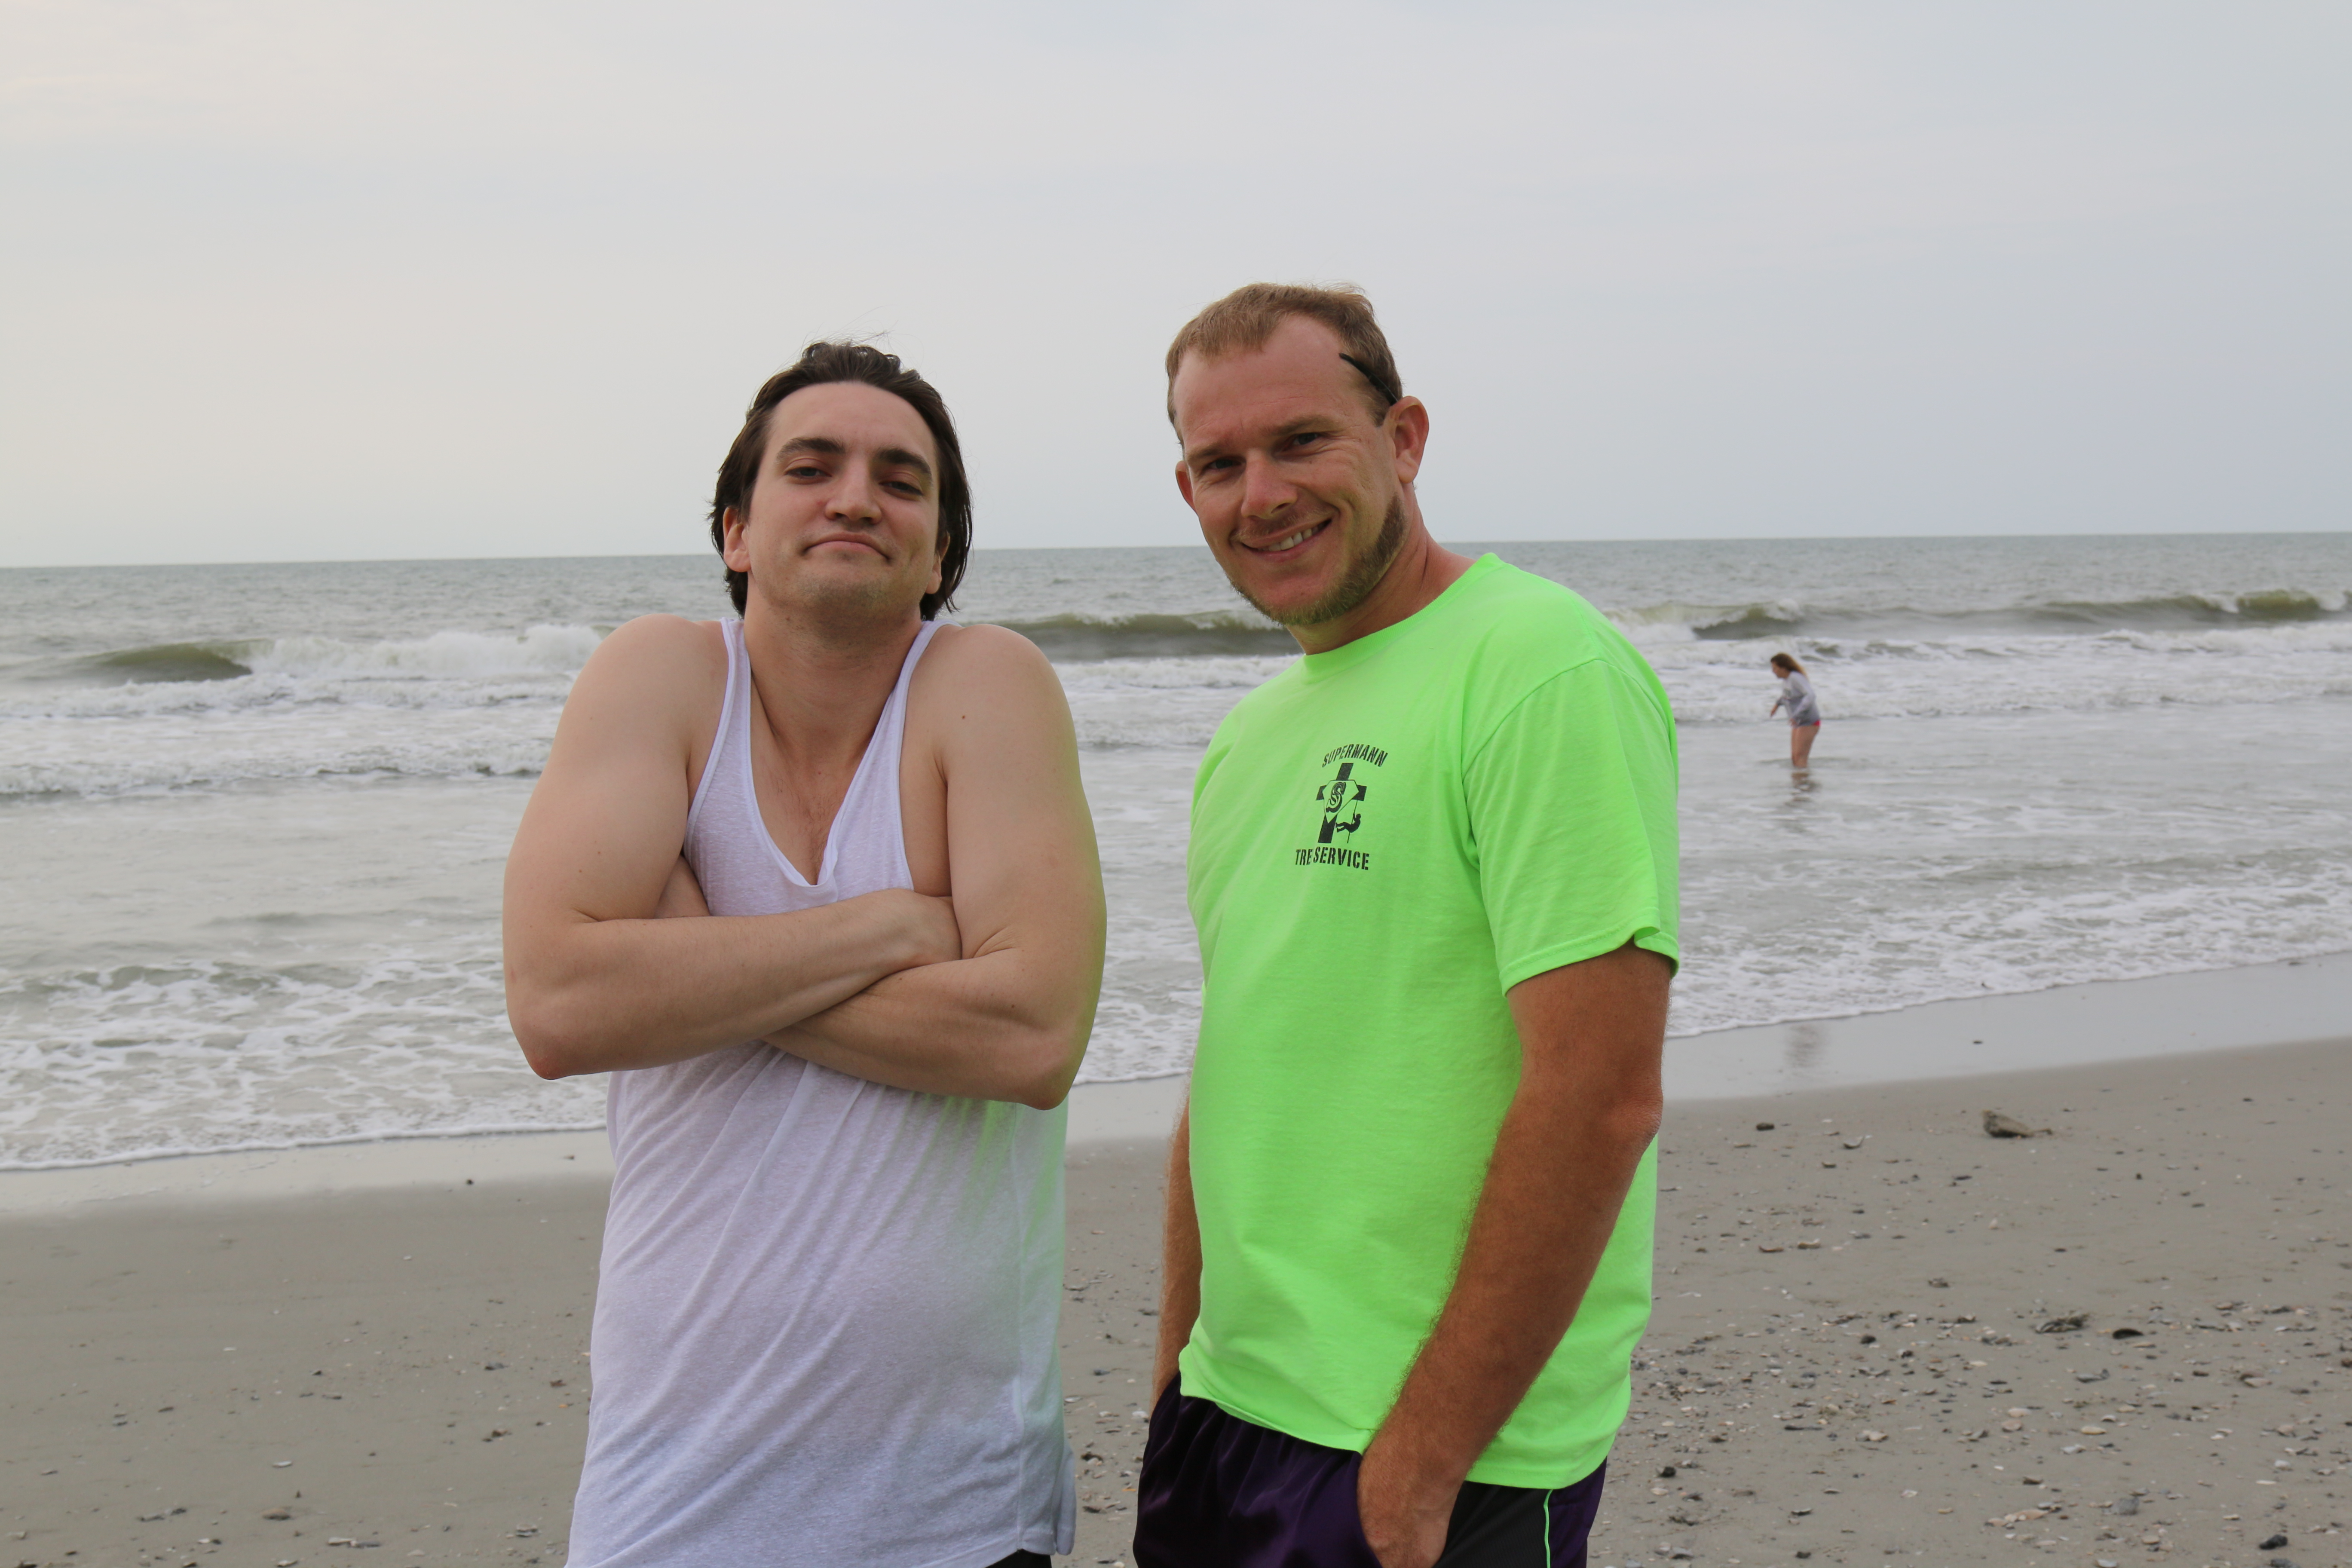 Richard S. Harmon, from the 100, and Lumberjack, were enjoying their selves at Myrtle Beach.